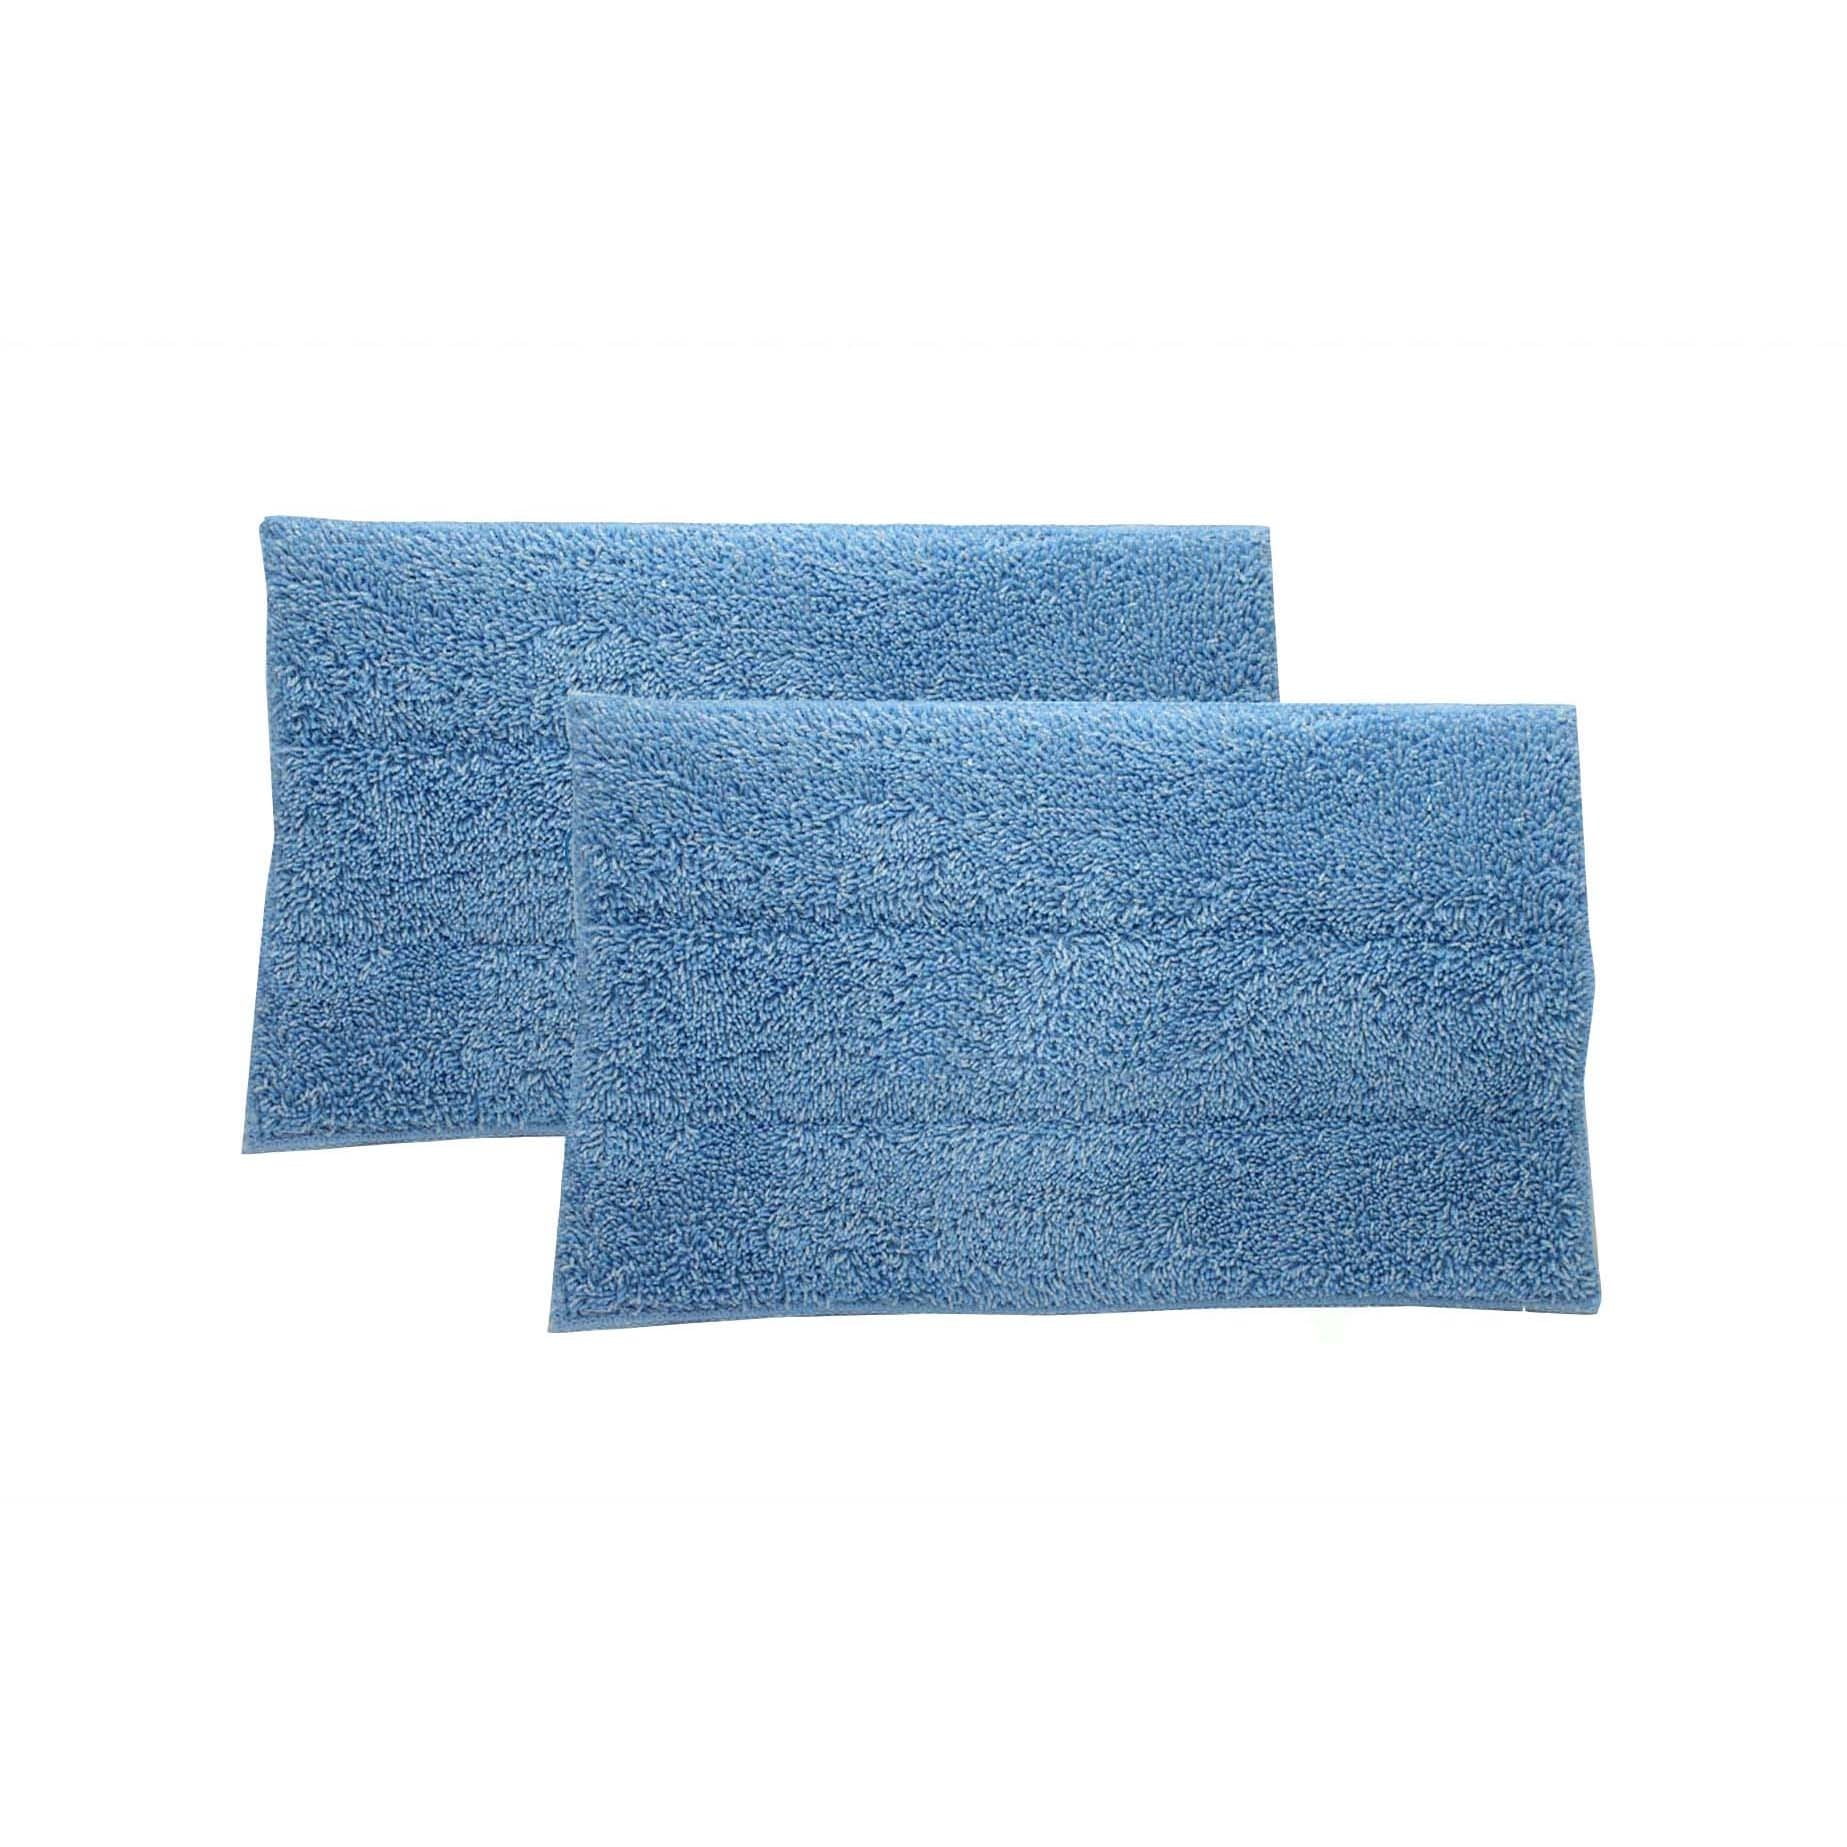 2 Blue Steam Mop Pads Fits HAAN®, Part # RMF2, RMF4